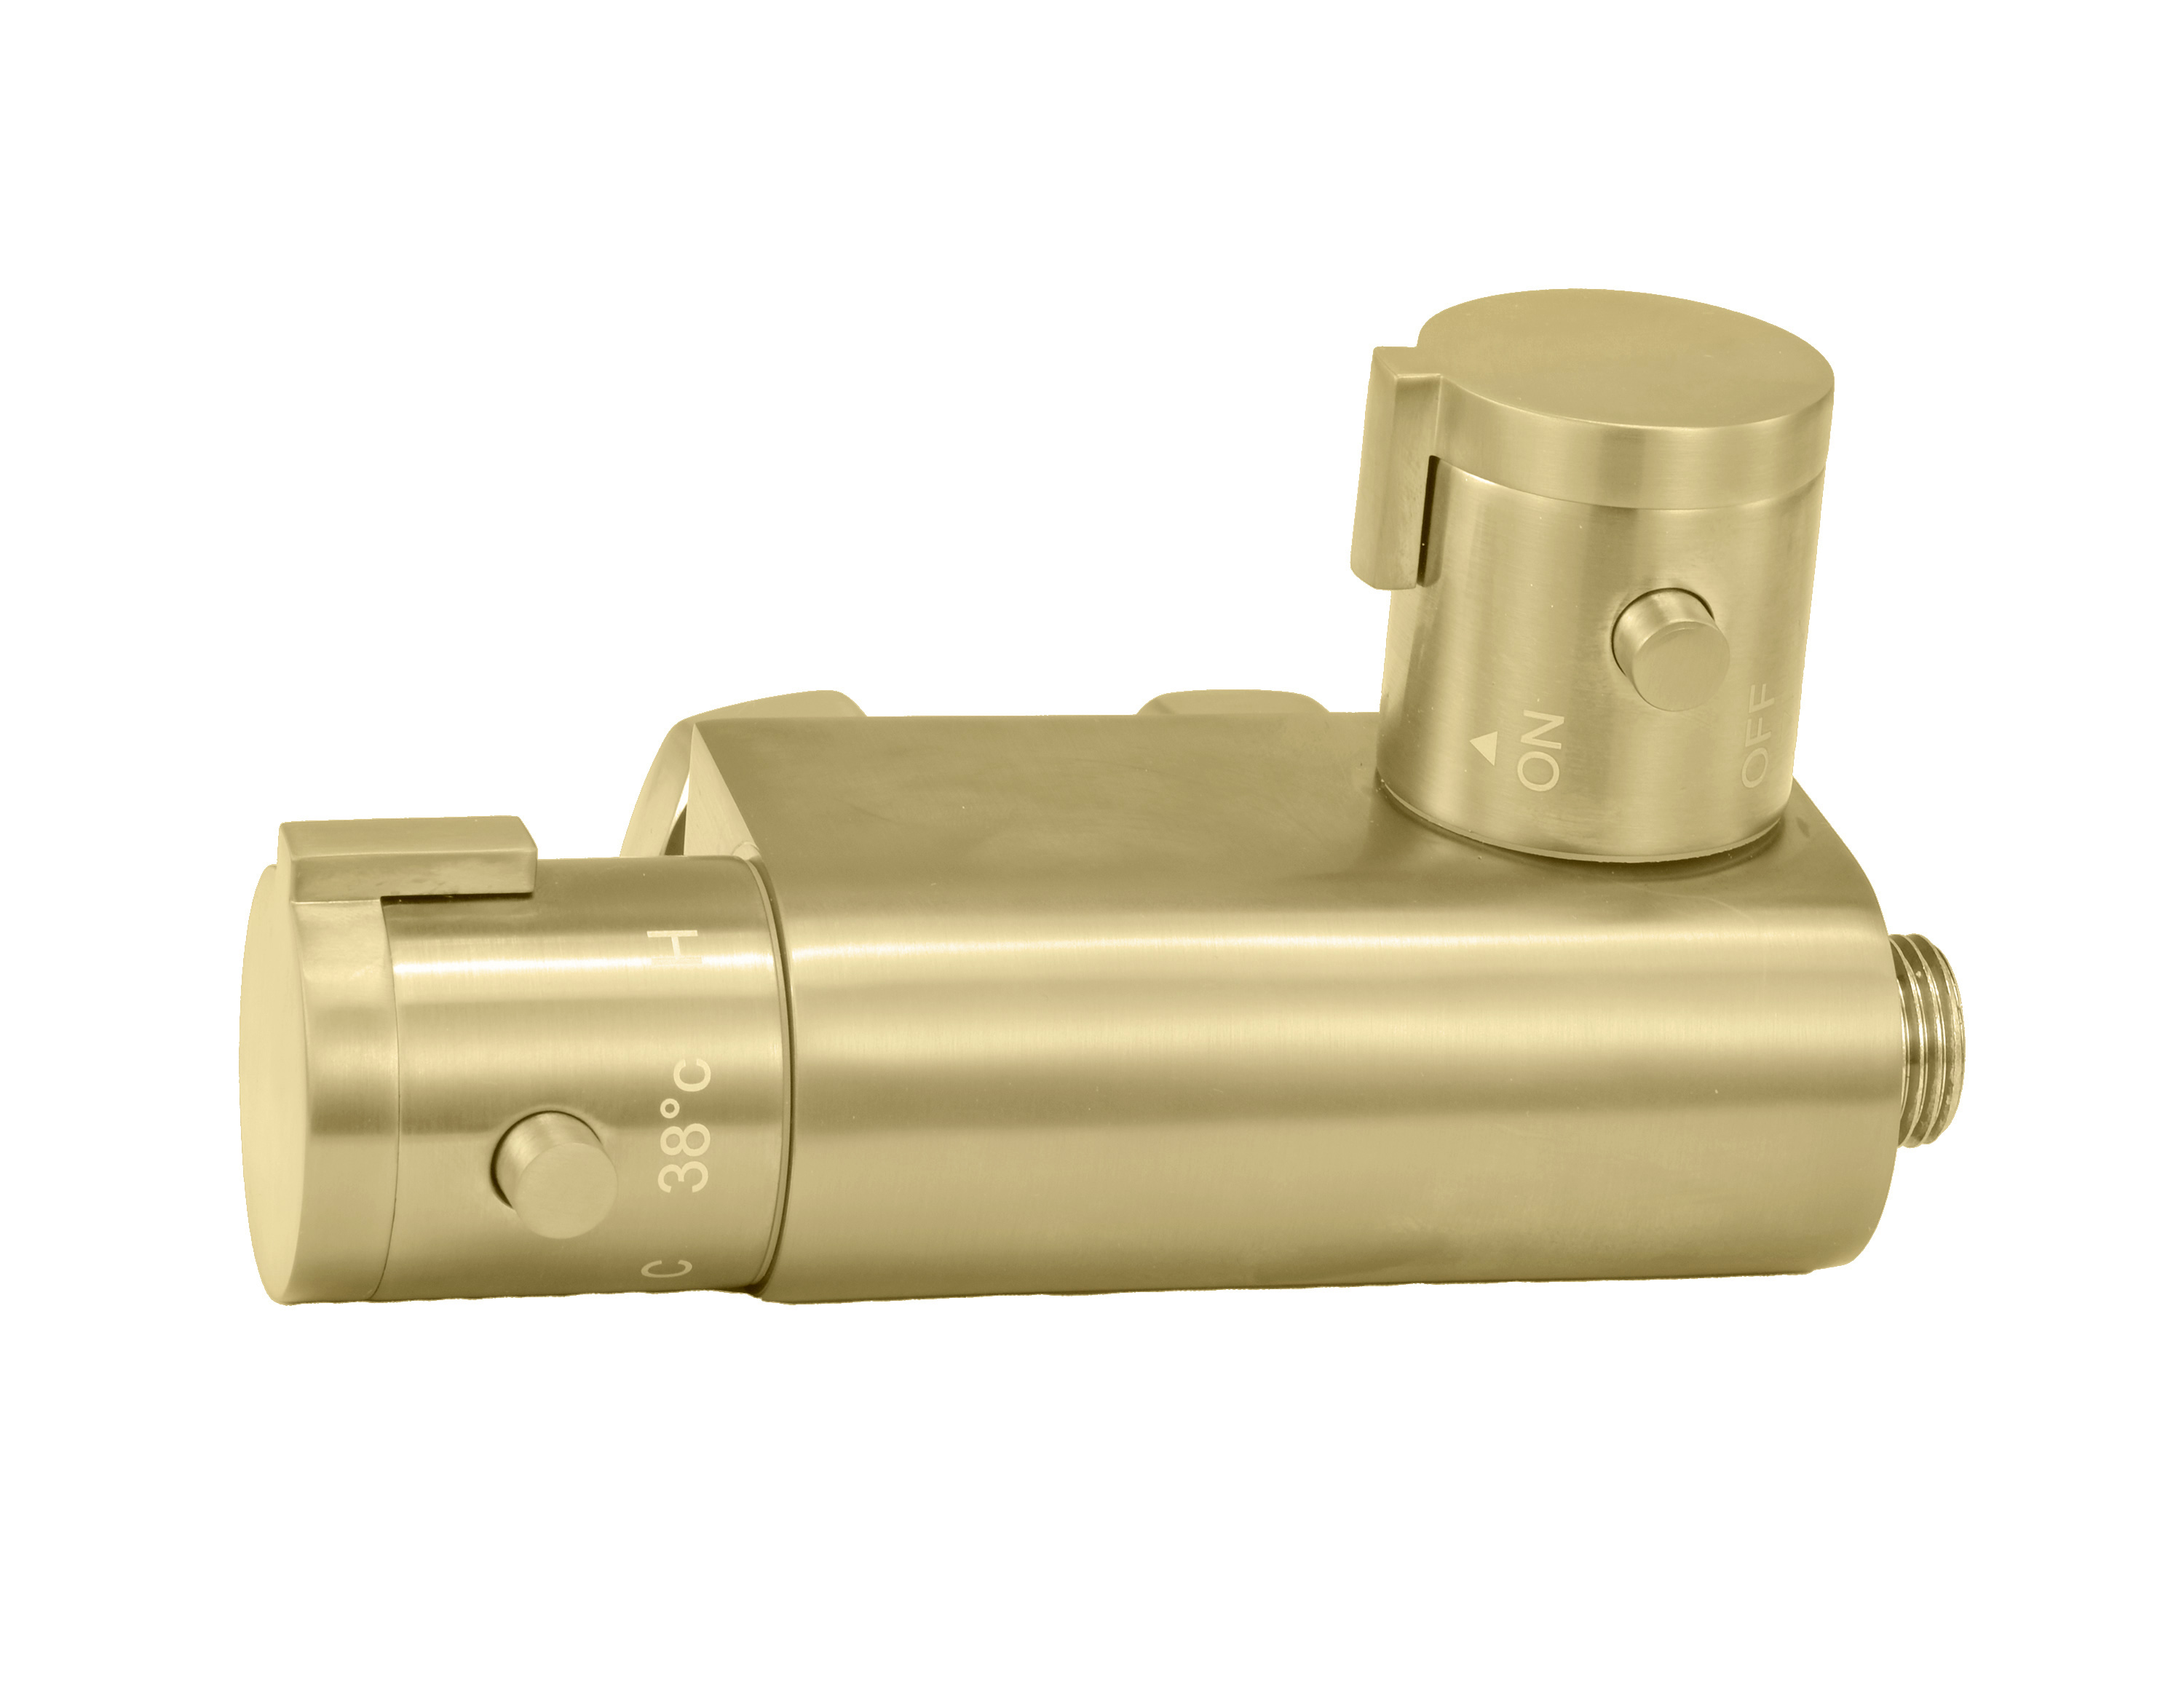 Eliseo Ricci Thermostatic Vertical Valve for Douche - Brushed Brass (19515)